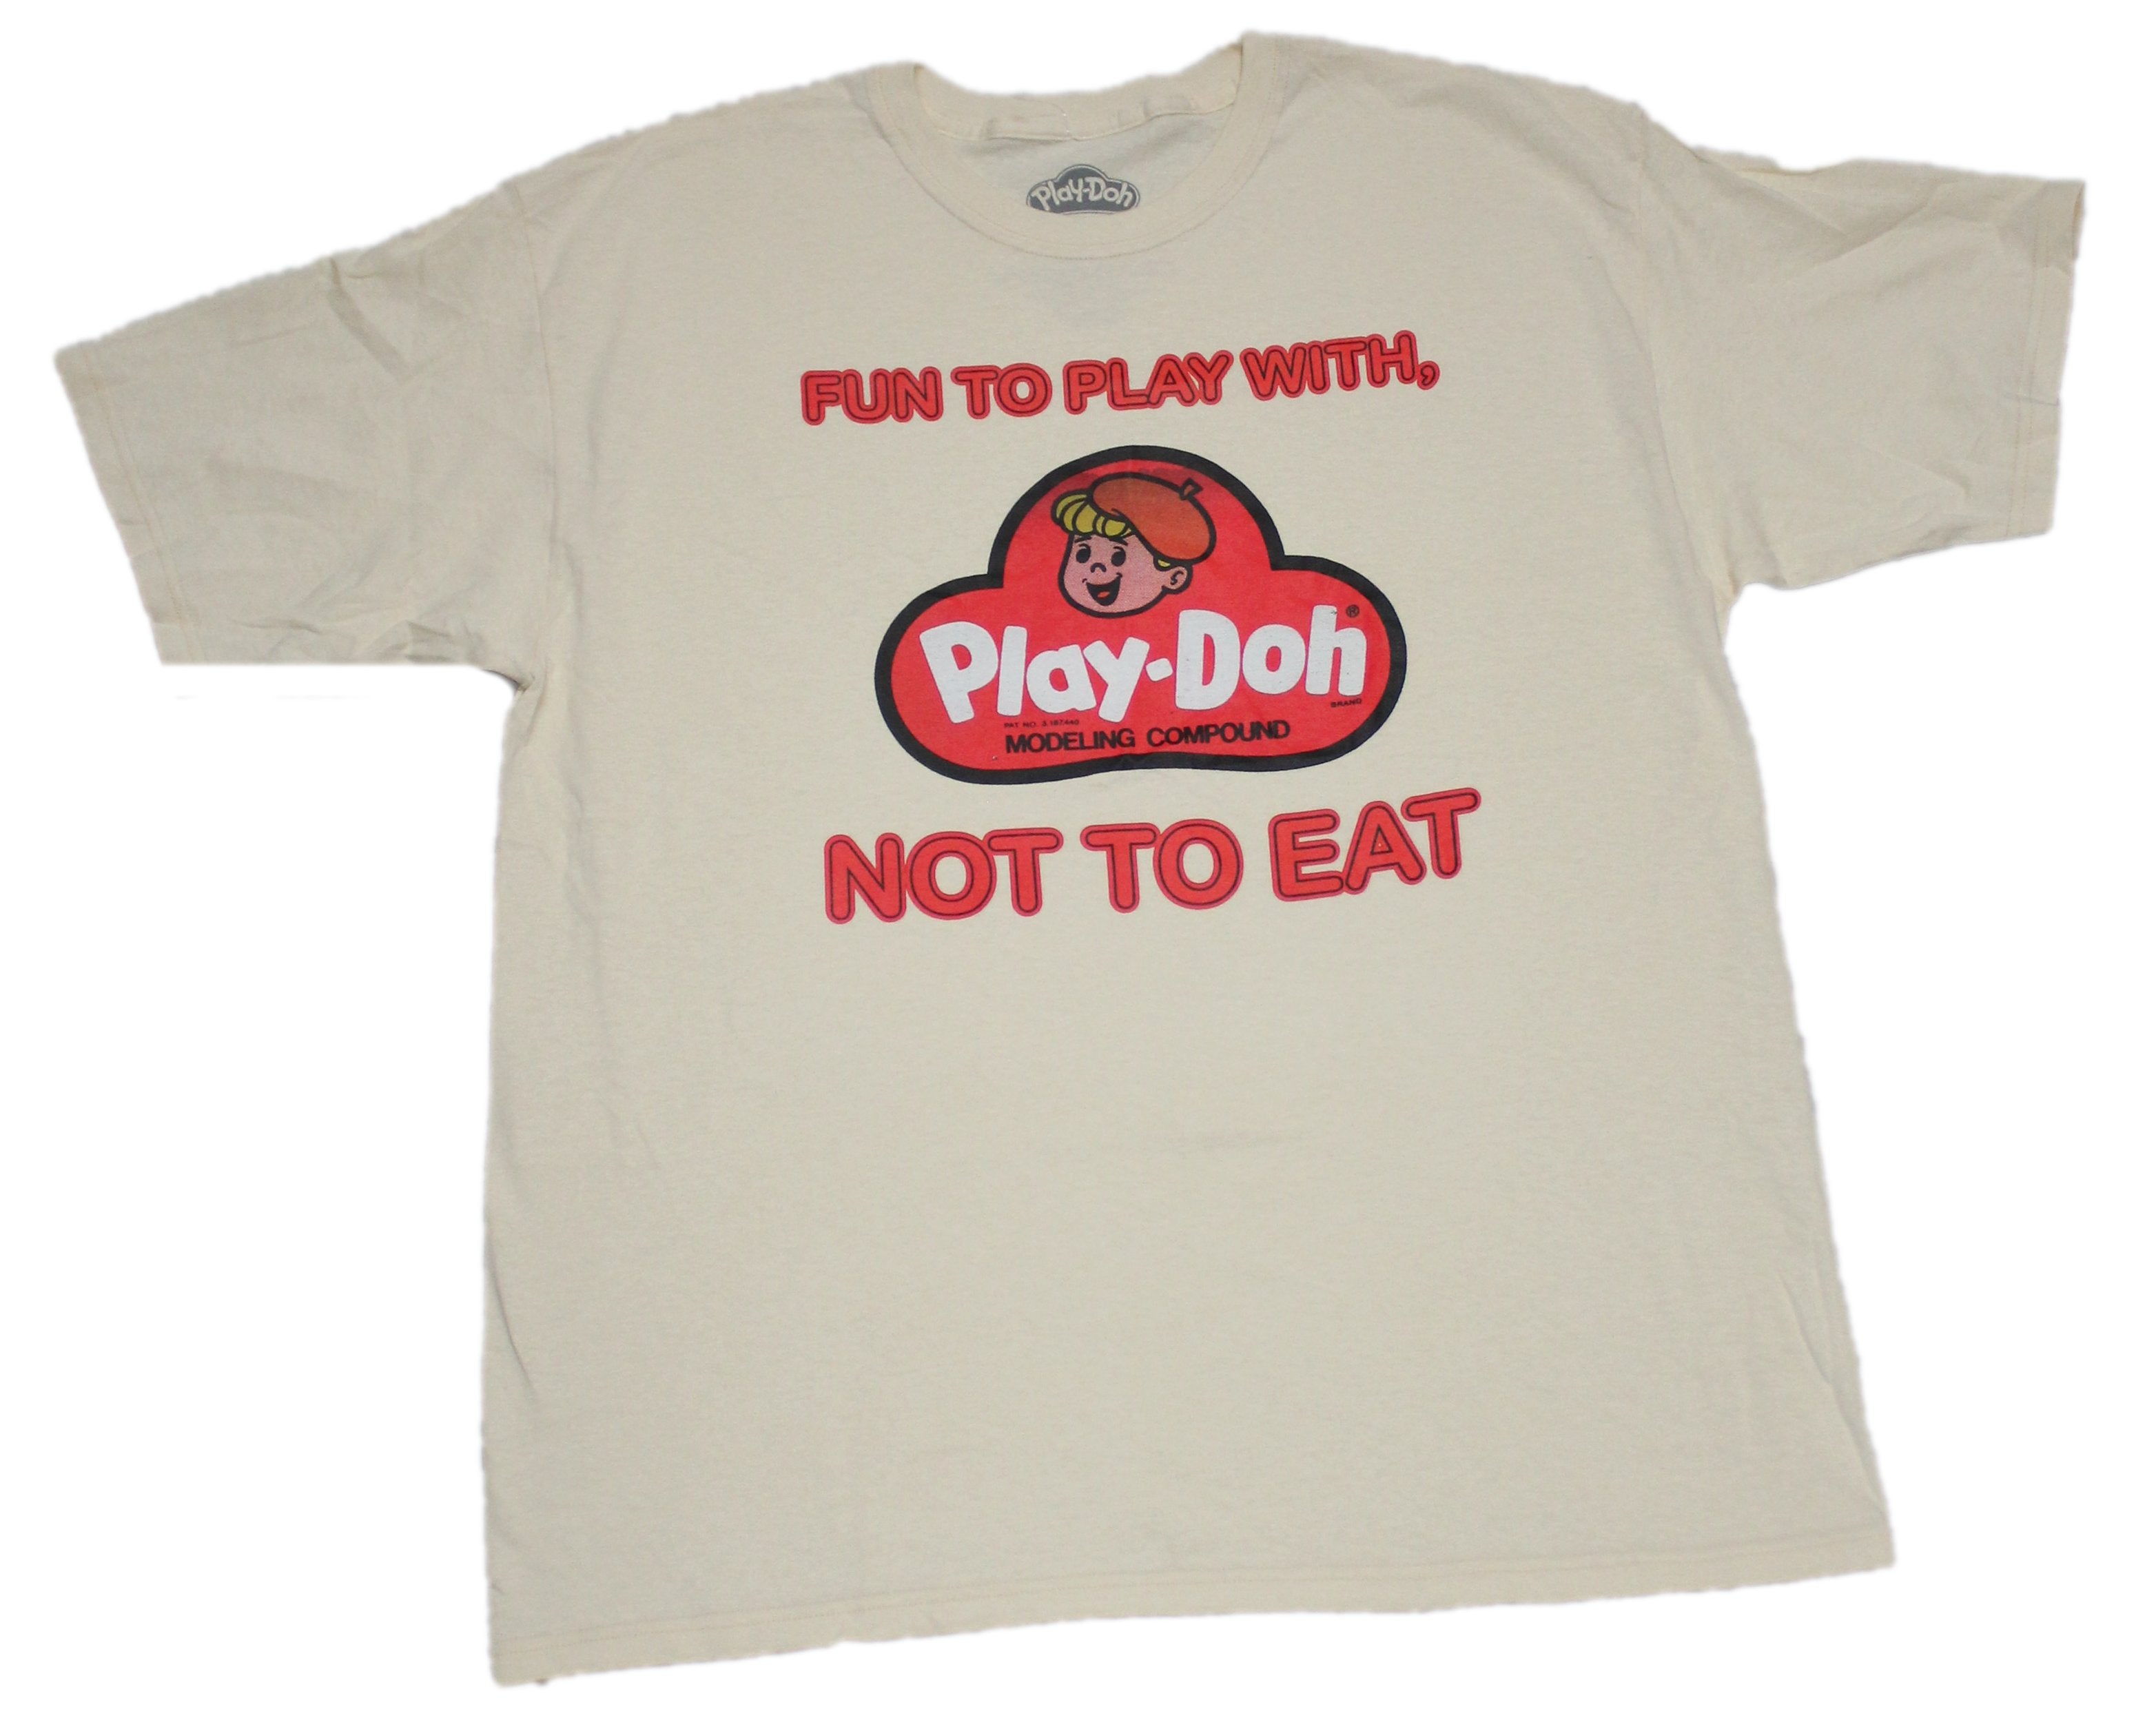 Play-Doh Other Clothing for Kids